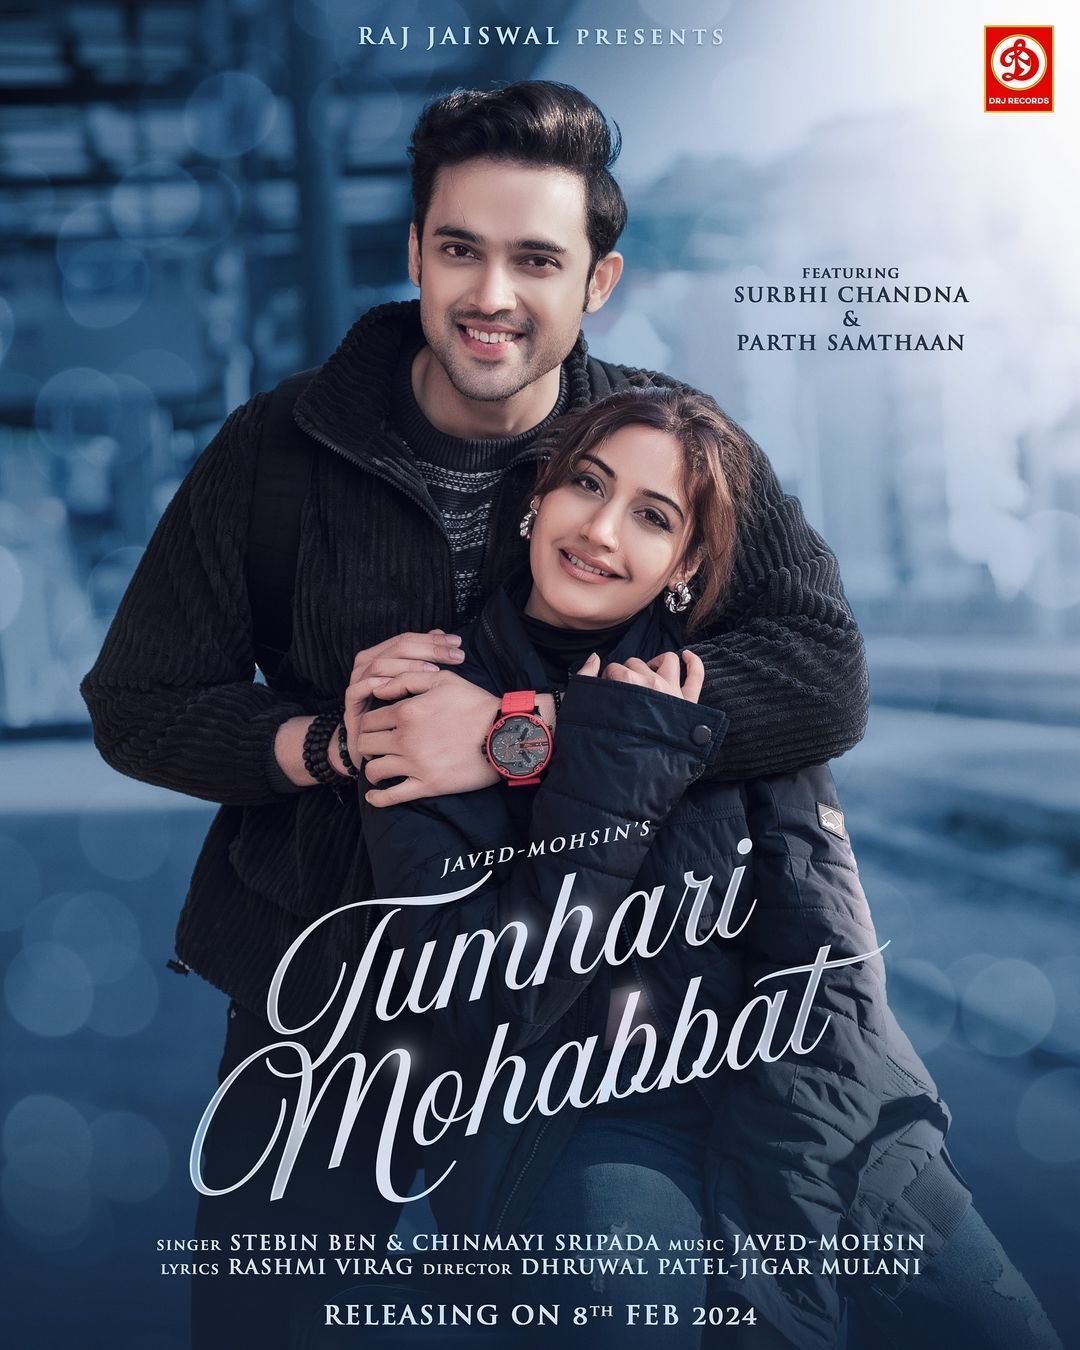 Surbhi Chandna’s New Song ‘Tumari Mohabbat’ Captures Essence Of Love. She Opens Up On Working For This Song!